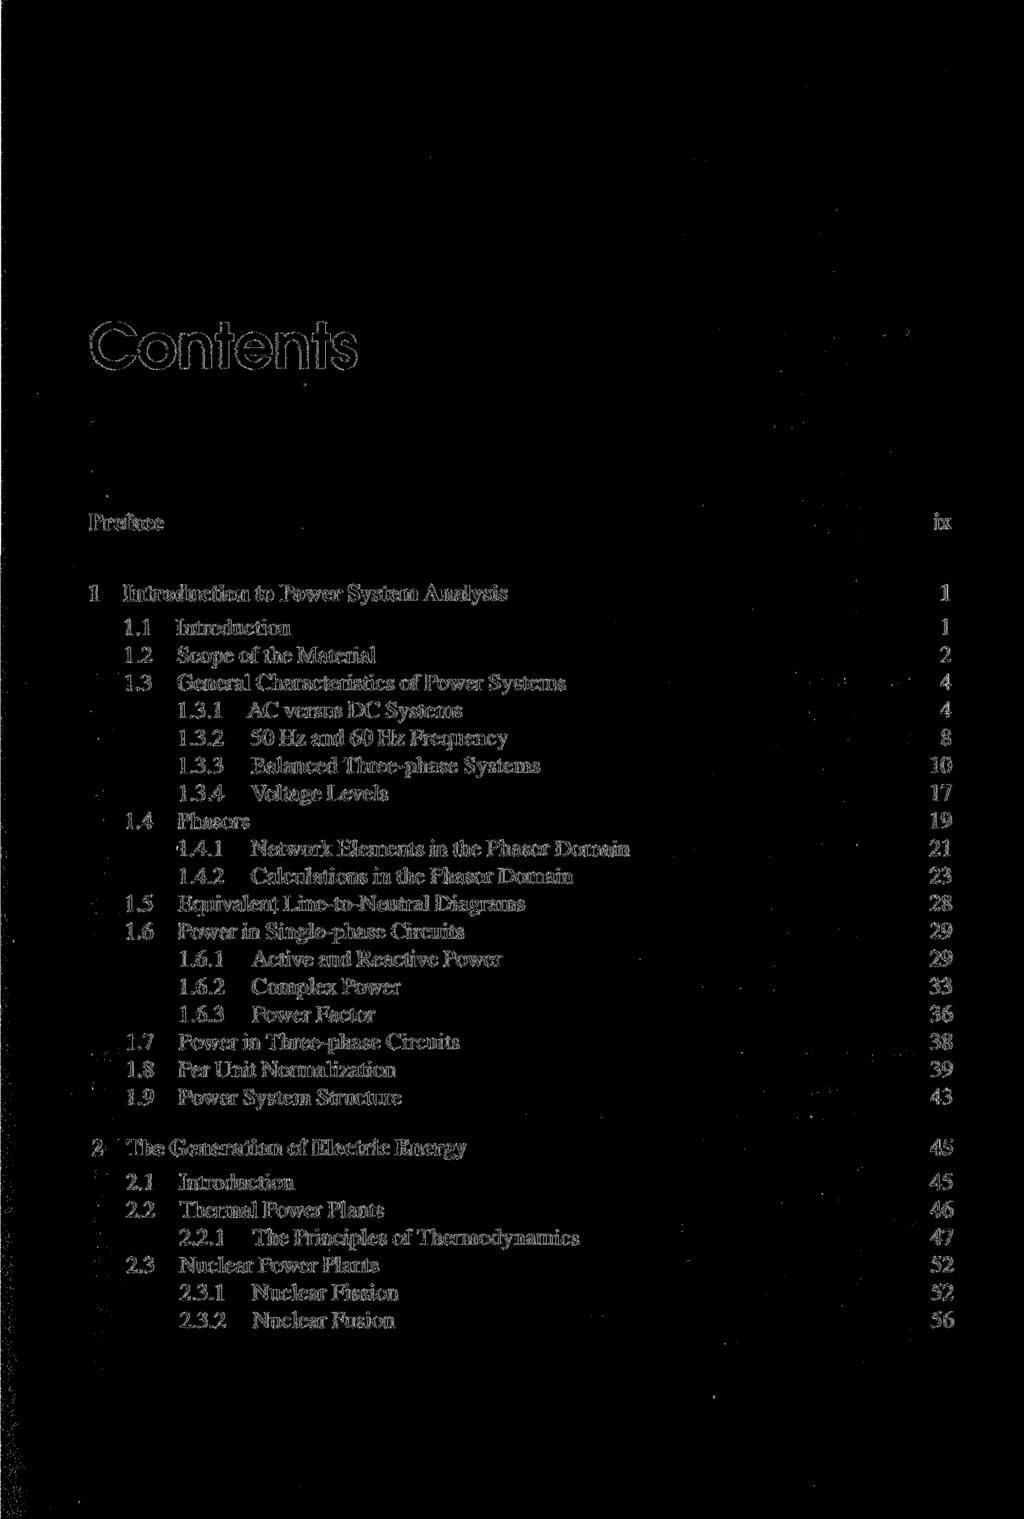 Contents Preface ix 1 Introduction to Power System Analysis 1 1.1 Introduction 1 1.2 Scope of the Material 2 1.3 General Characteristics of Power Systems 4 1.3.1 AC versus DC Systems 4 1.3.2 50 Hz and 60 Hz Frequency 8 1.